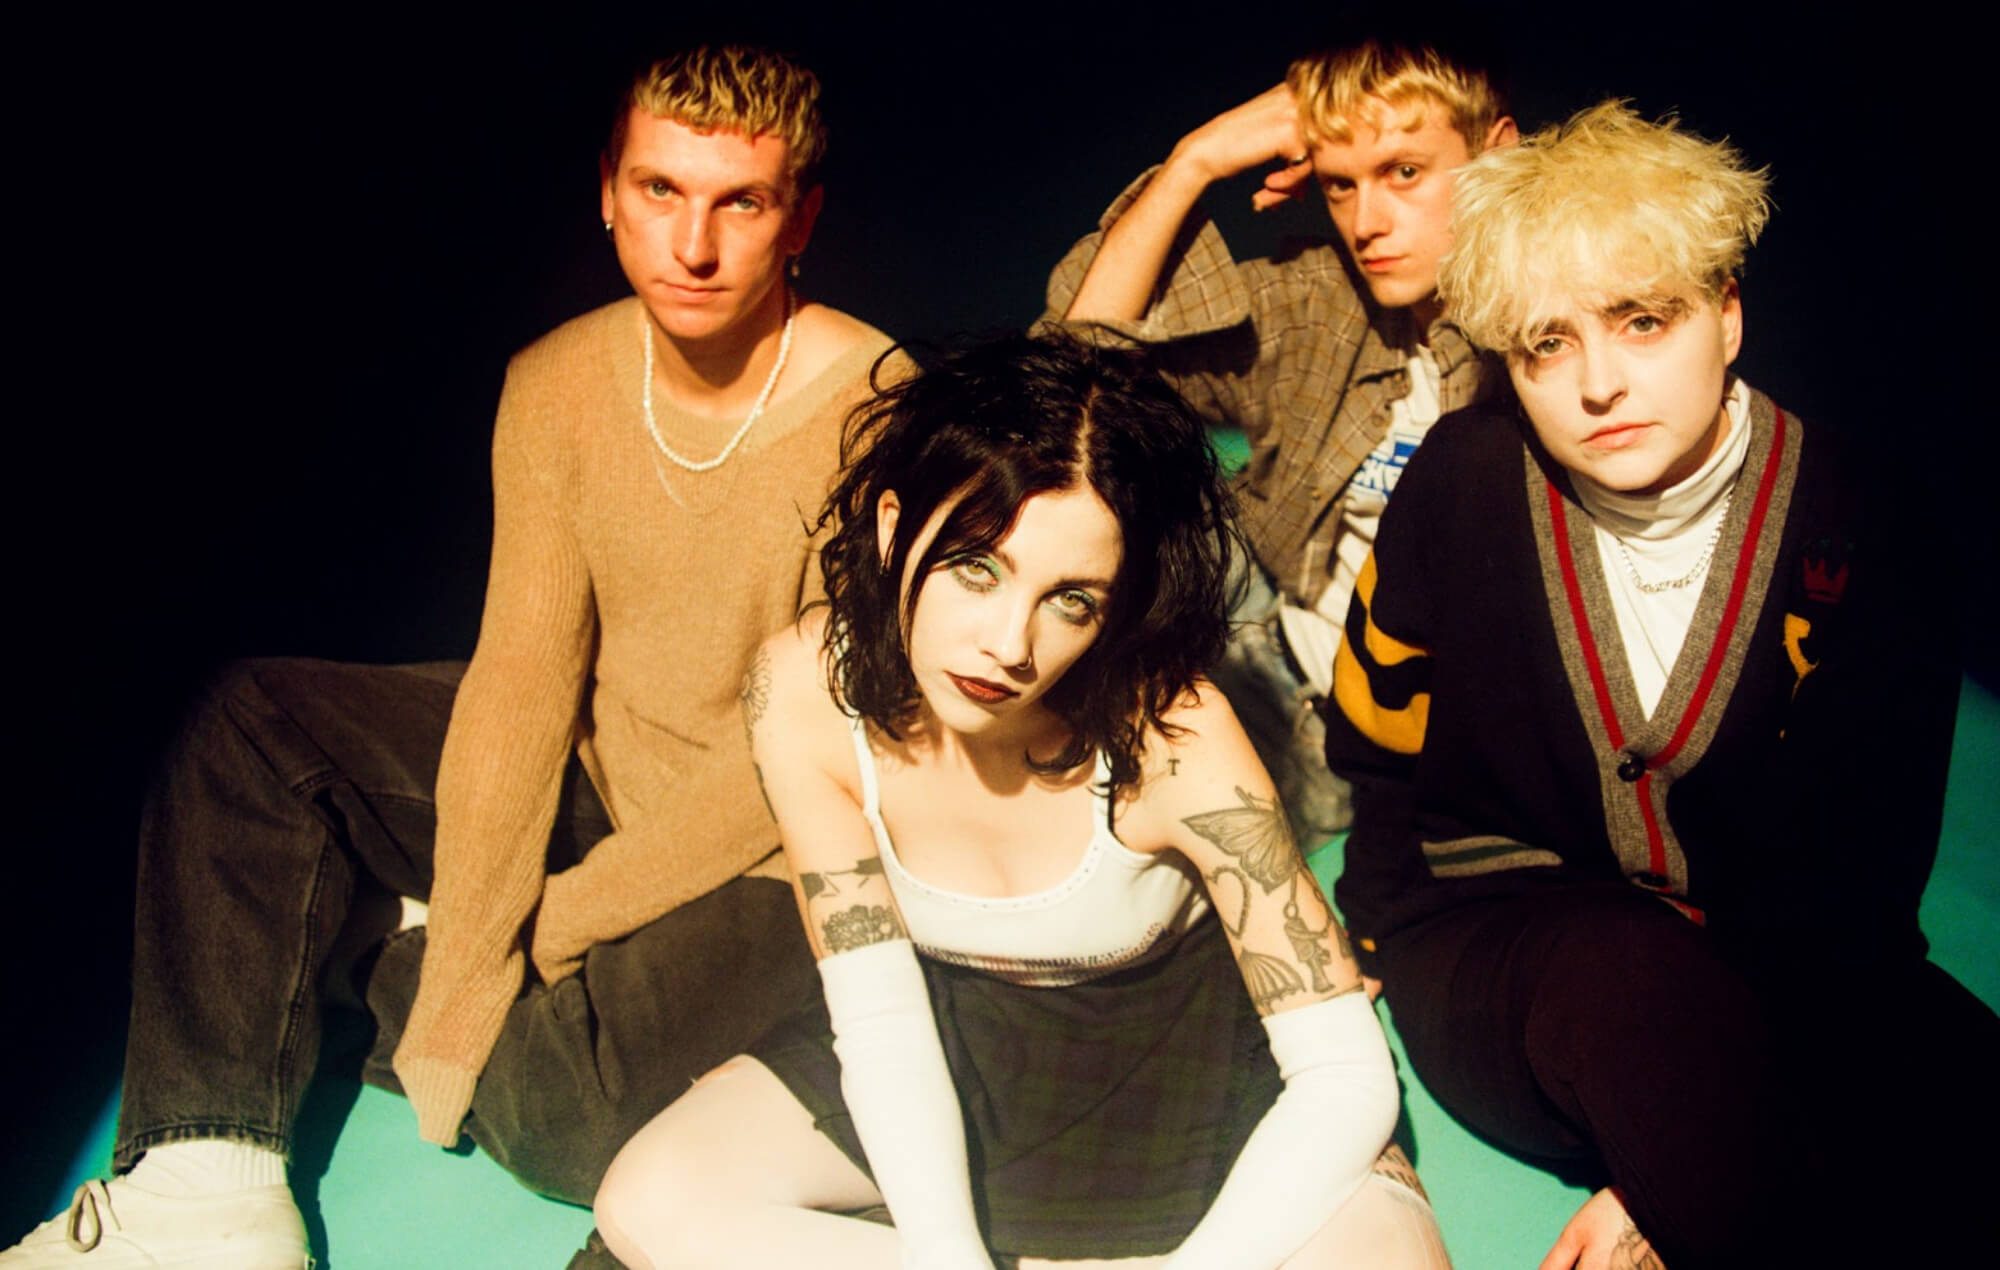 PALE WAVES RELEASE MUSIC VIDEO FOR NEW SINGLE “EASY”